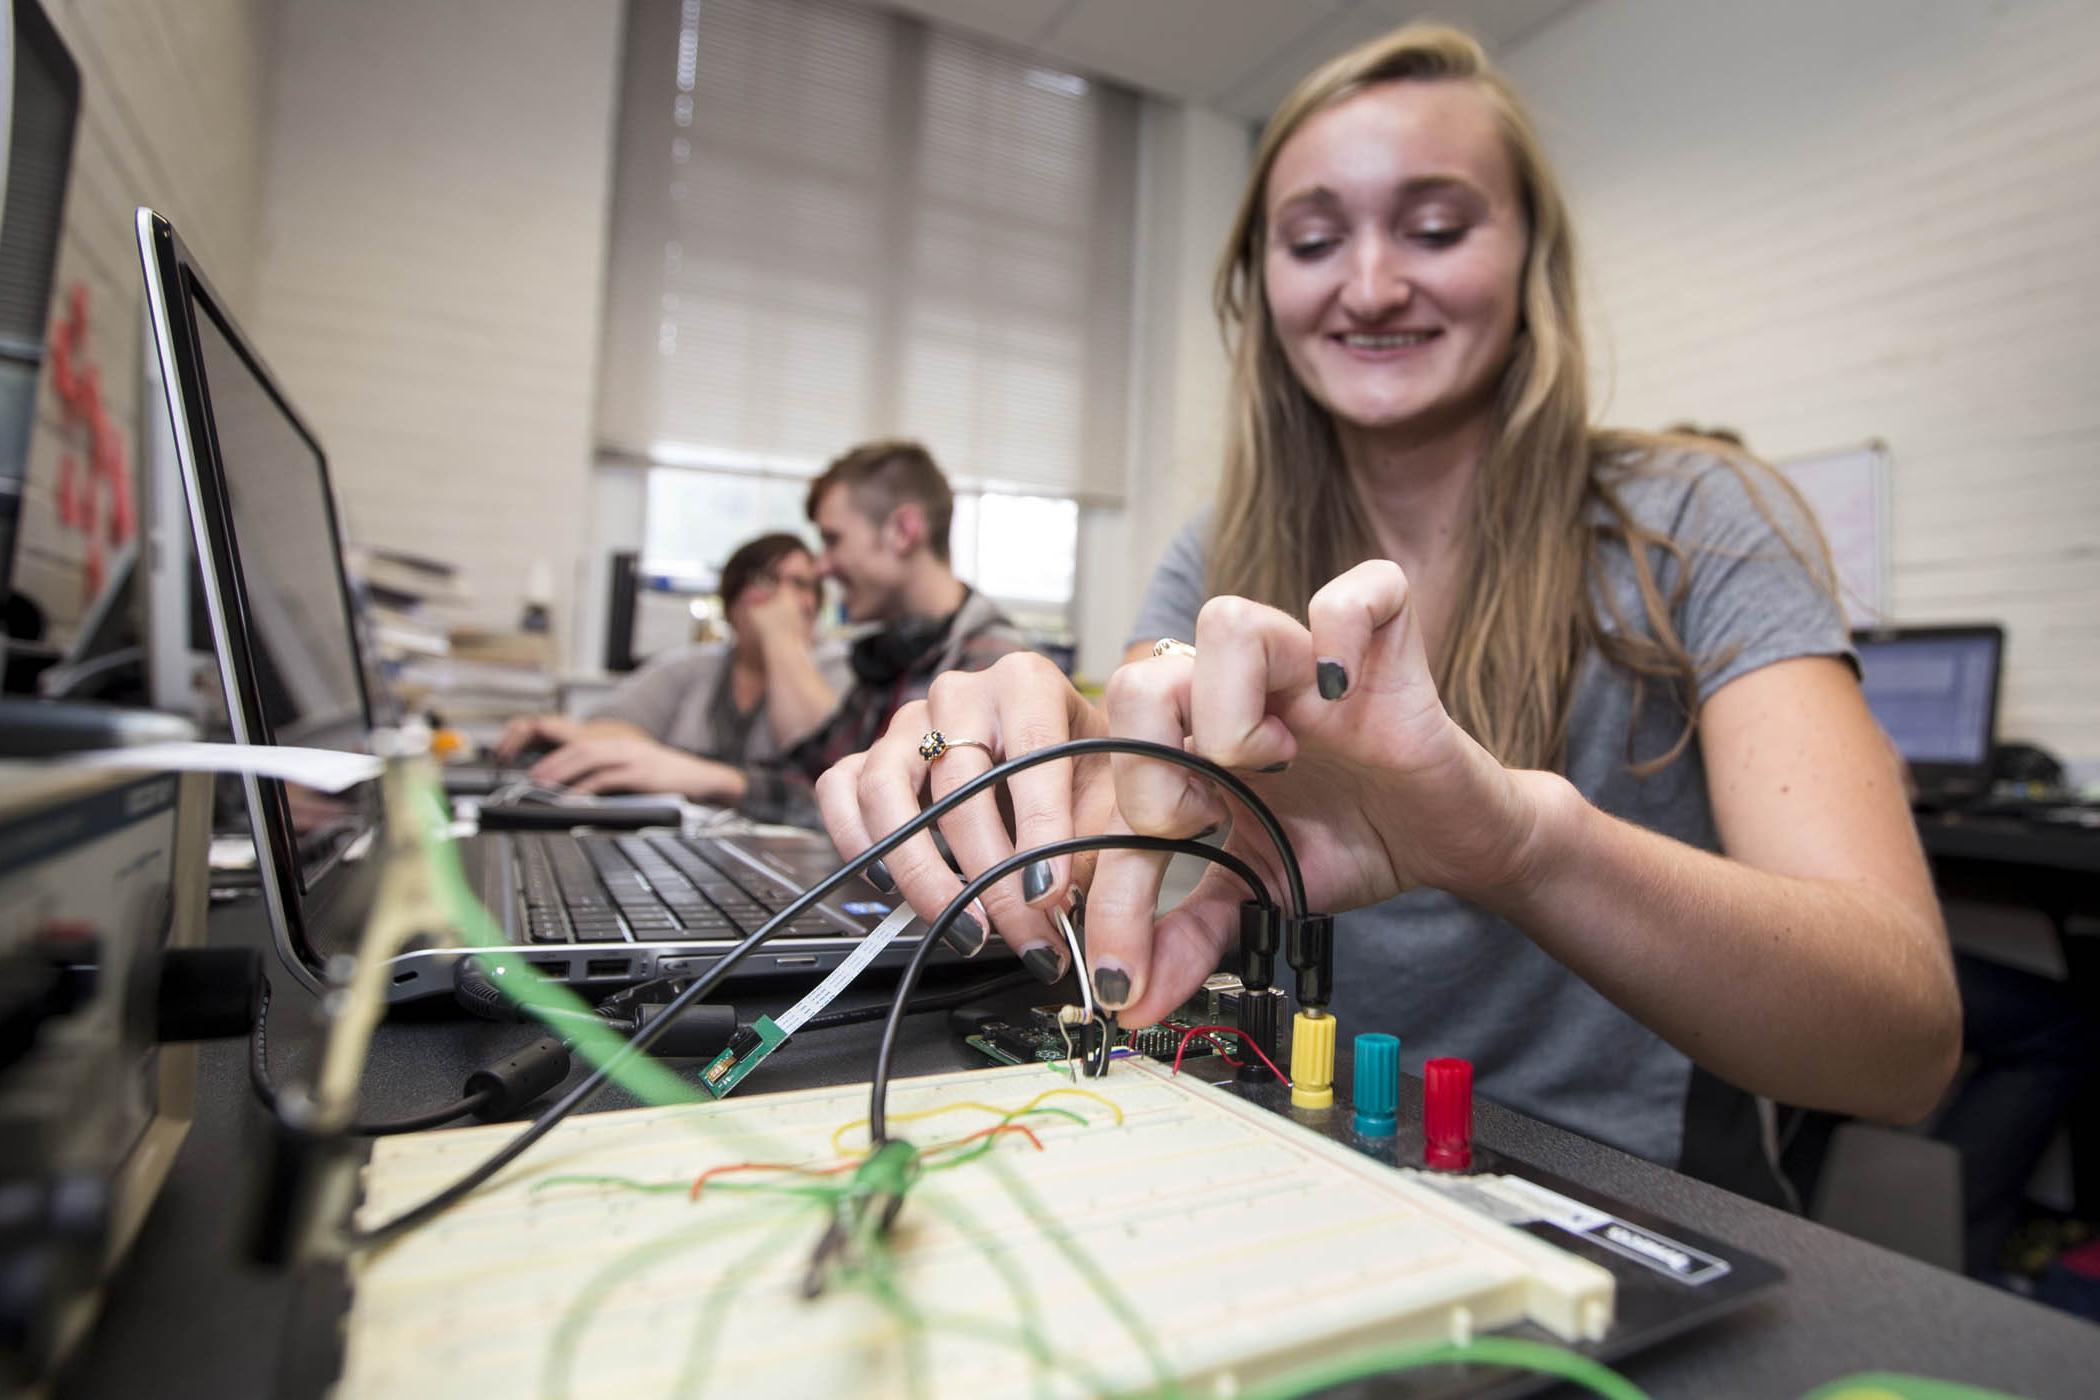 Student checks electrical connections on instruments